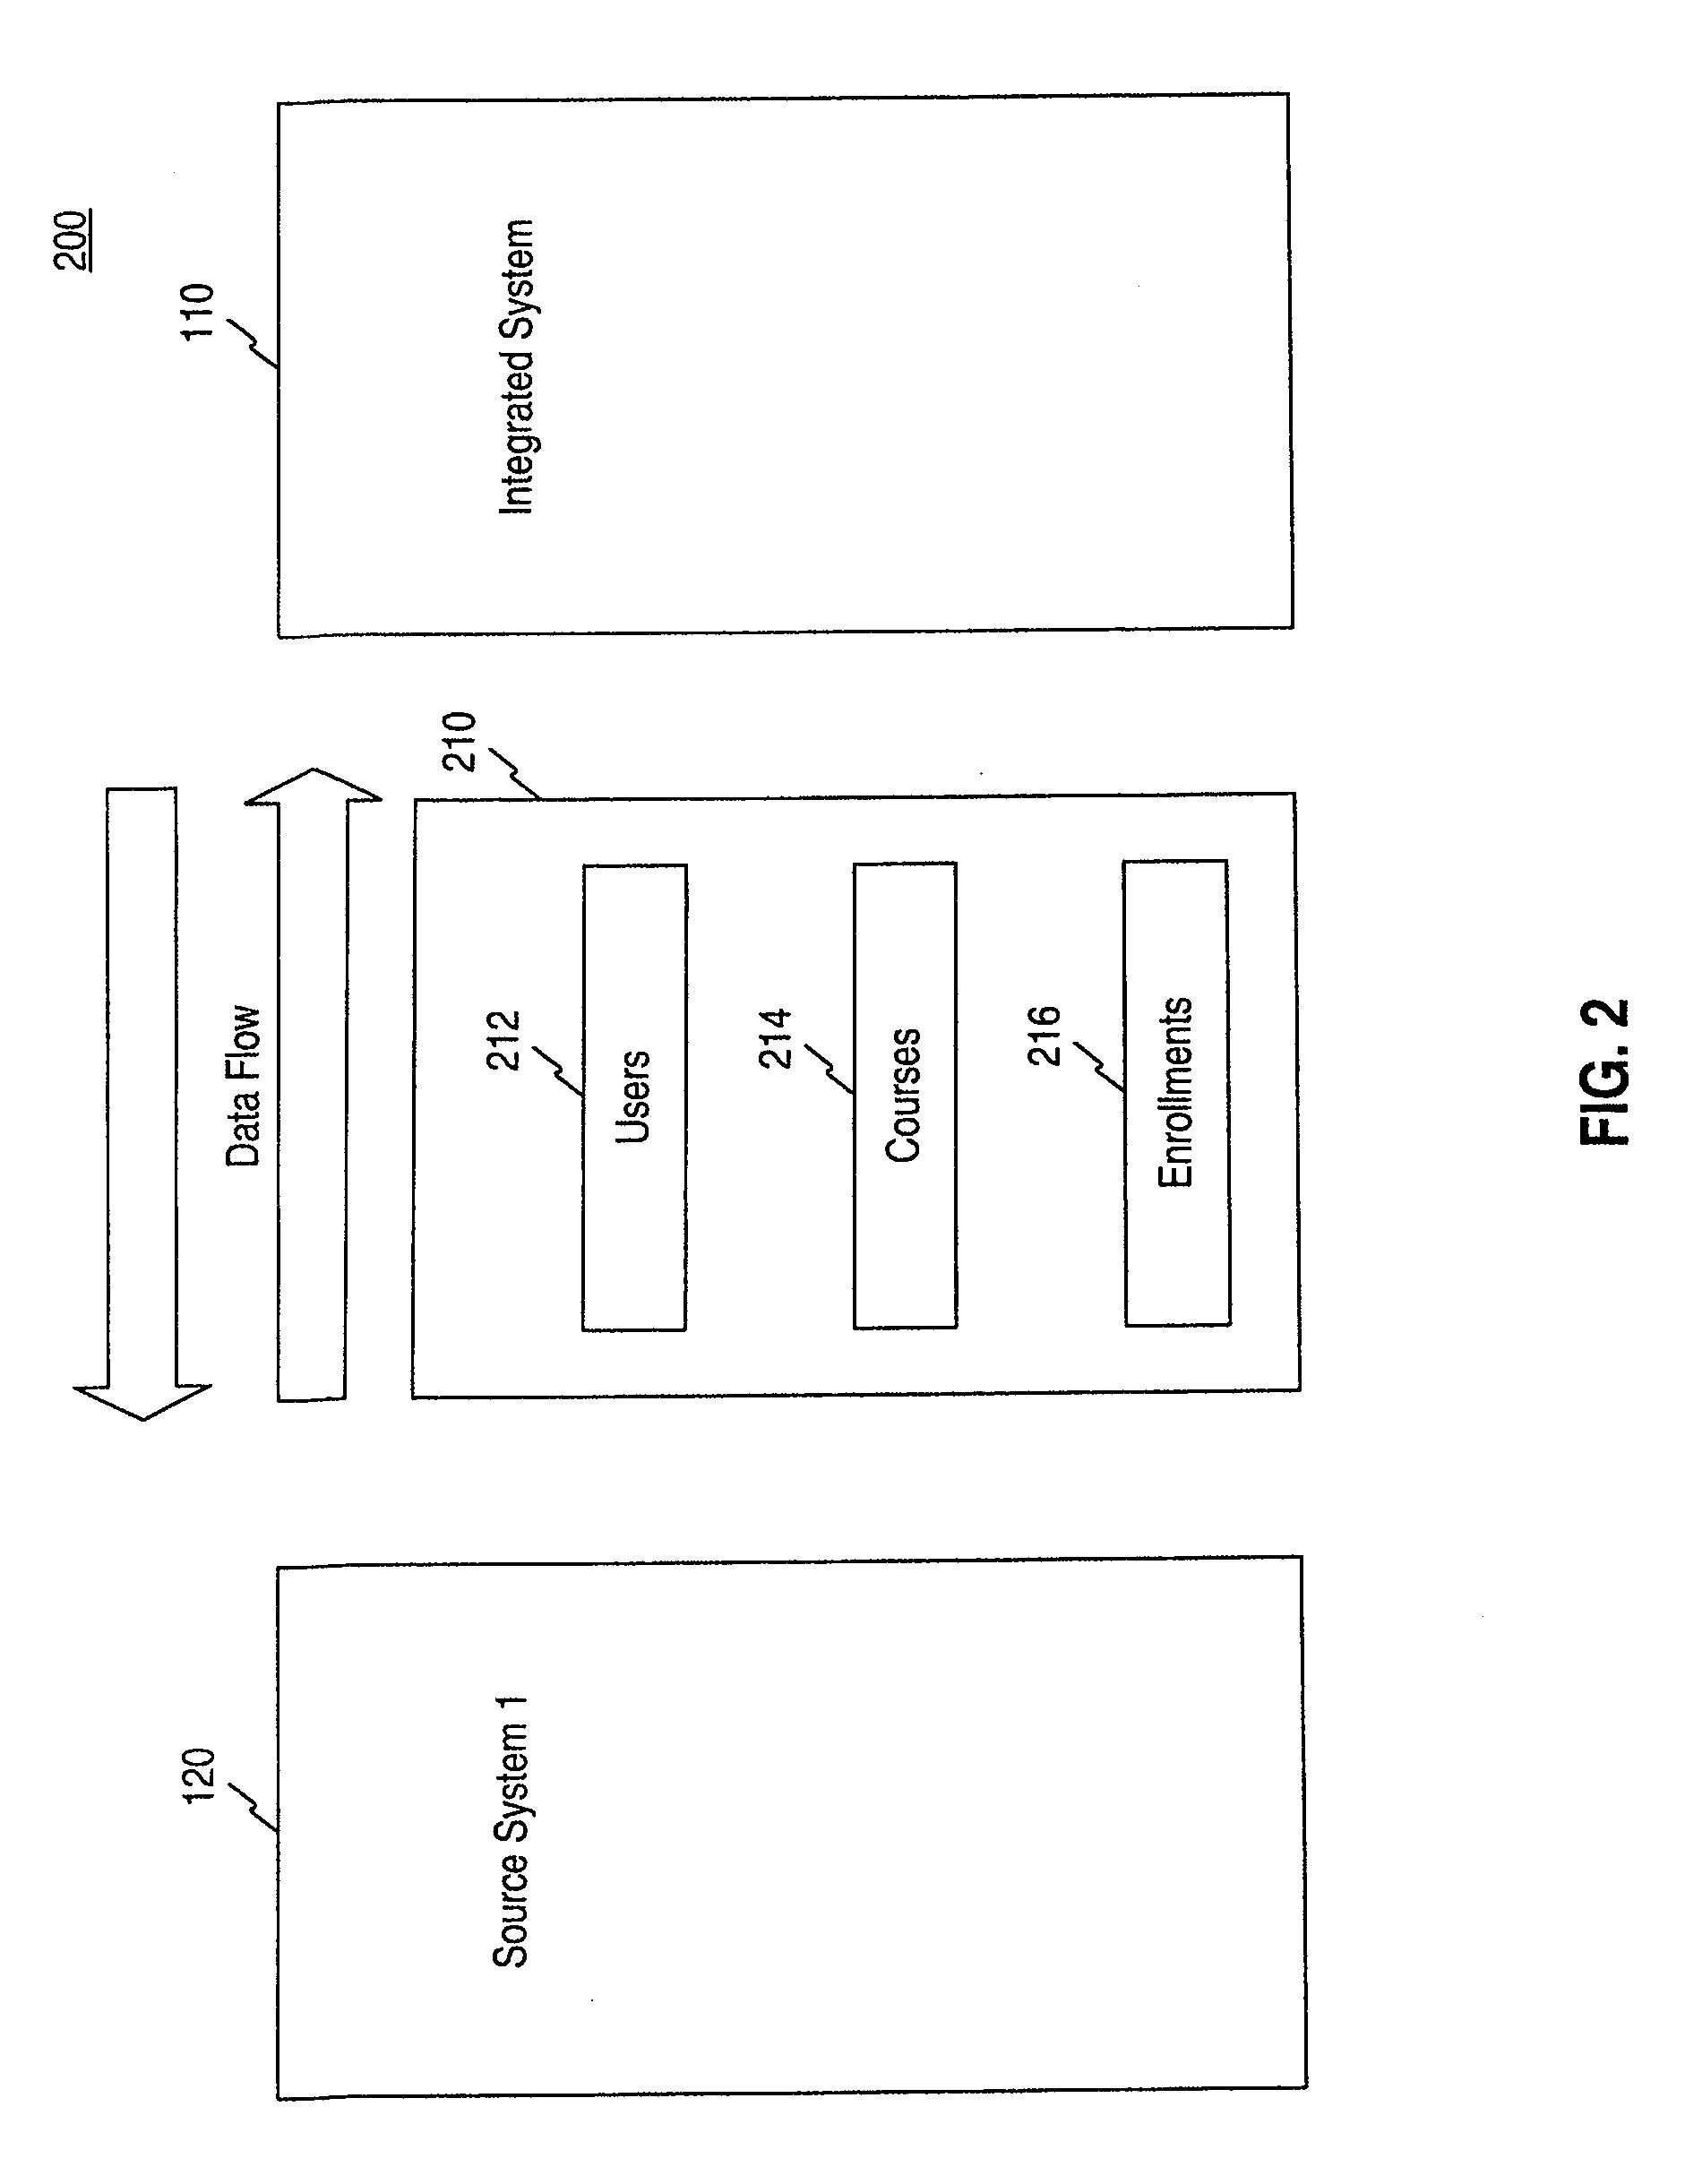 Systems and methods for integrating educational software systems